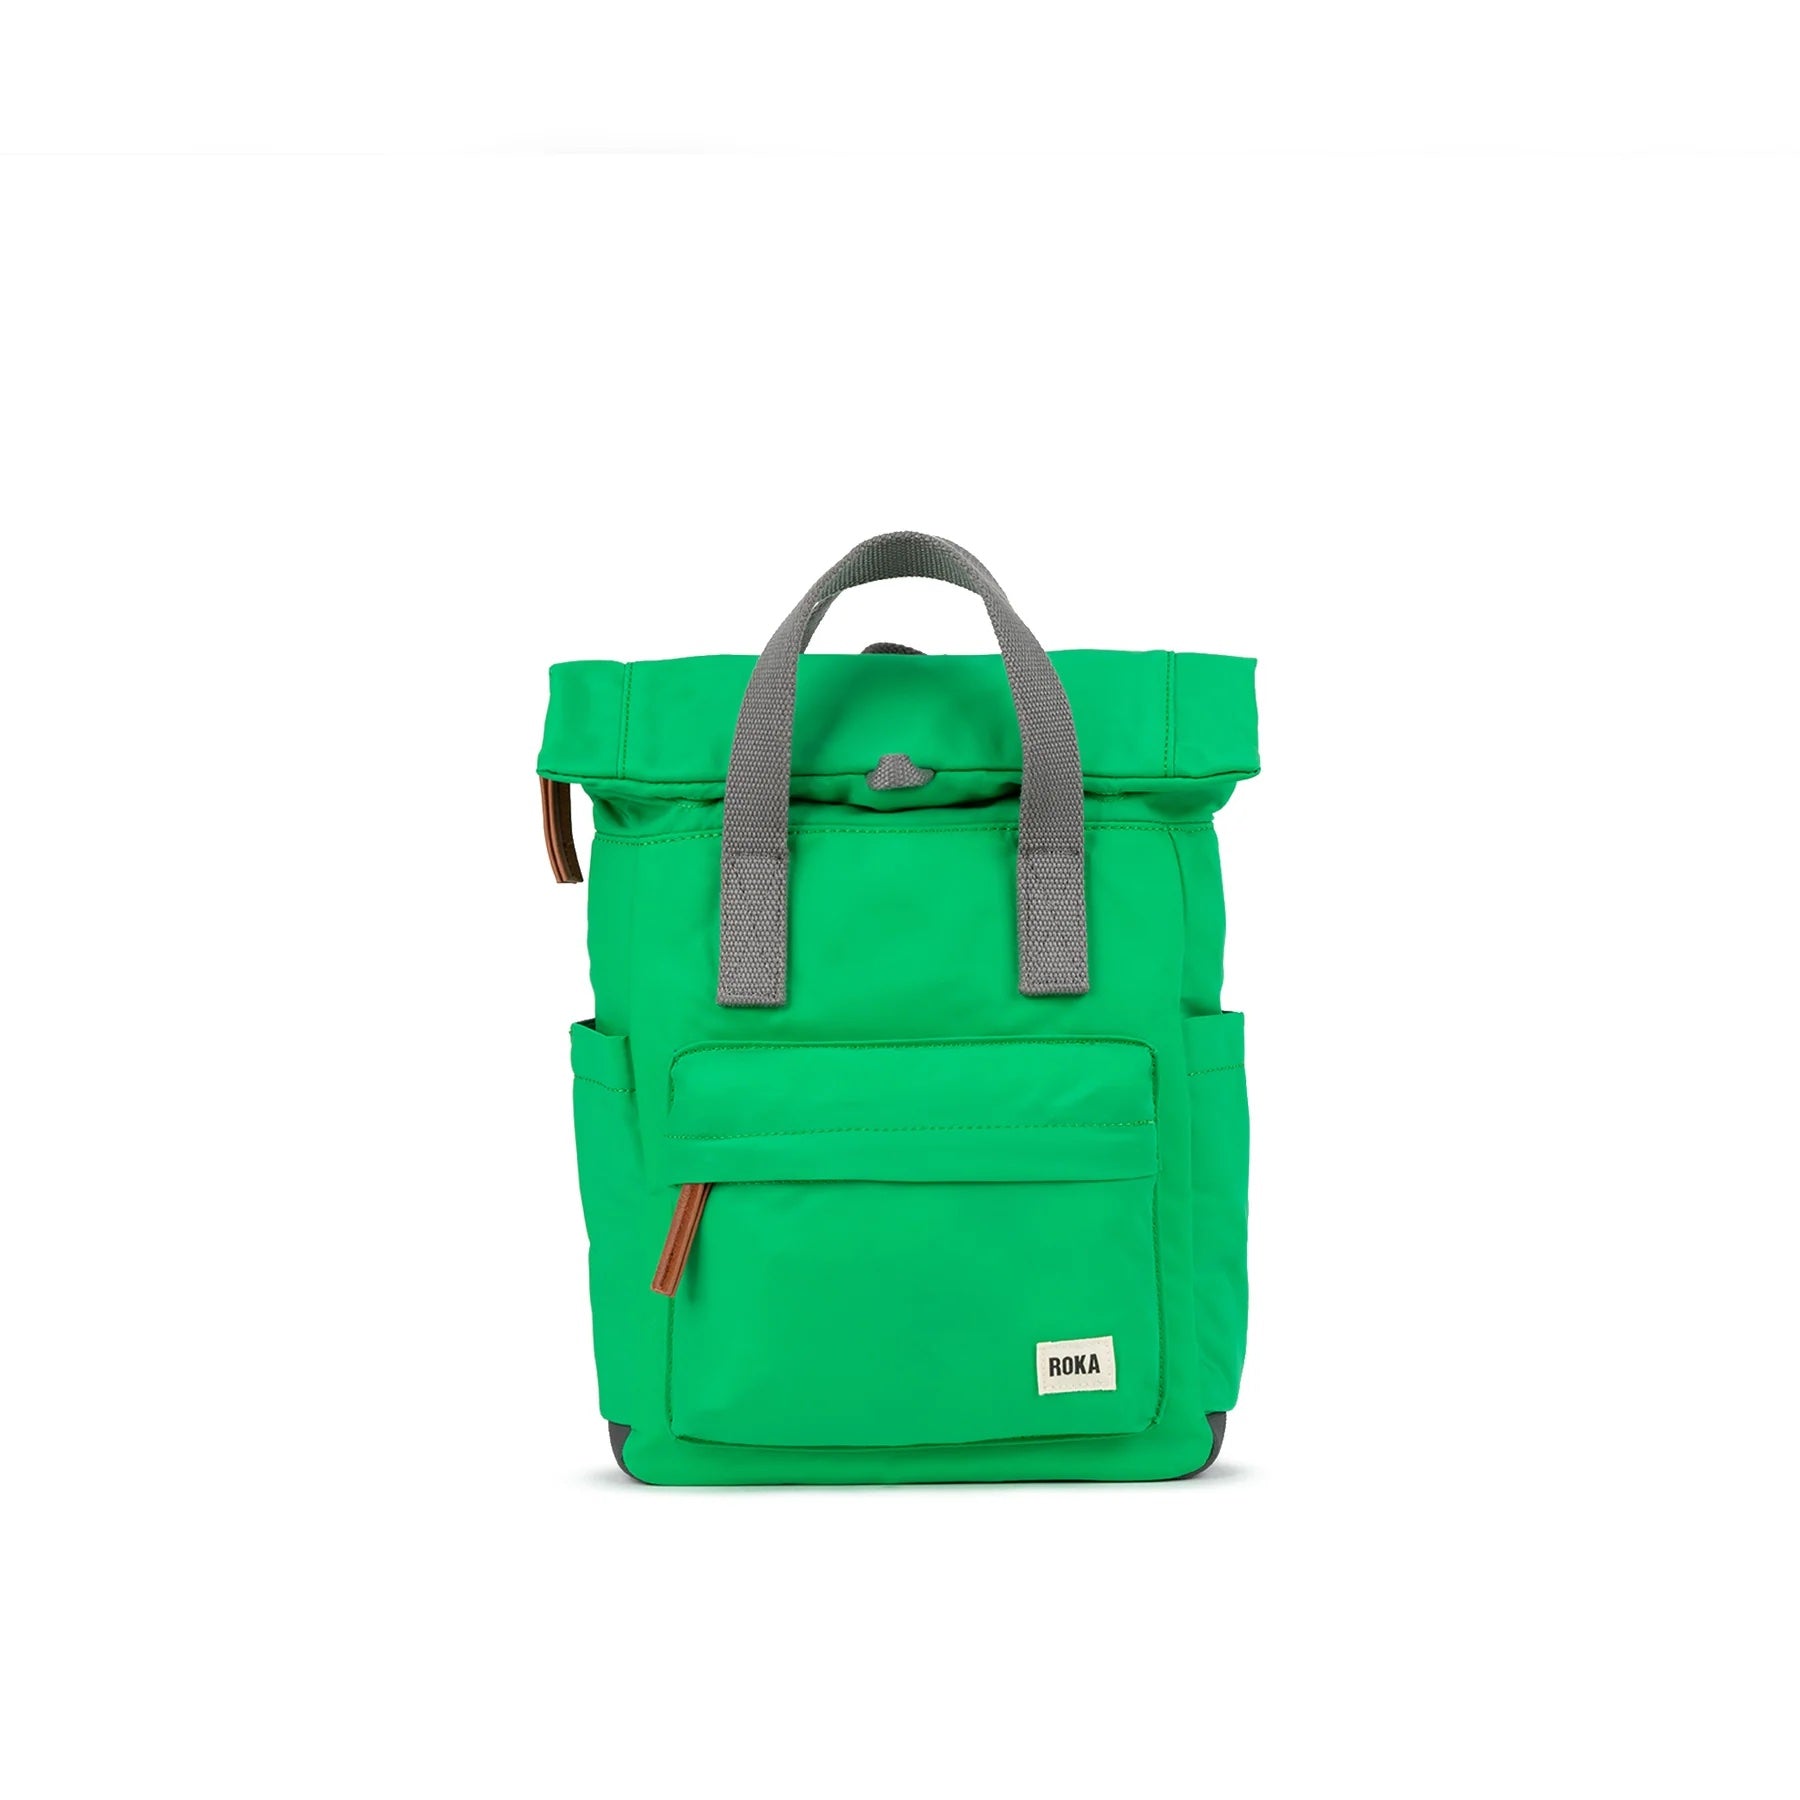 Photo showing the front of a small bright green backpack. There is a large pocket on the front with a brown zip pull, and the handles are grey.